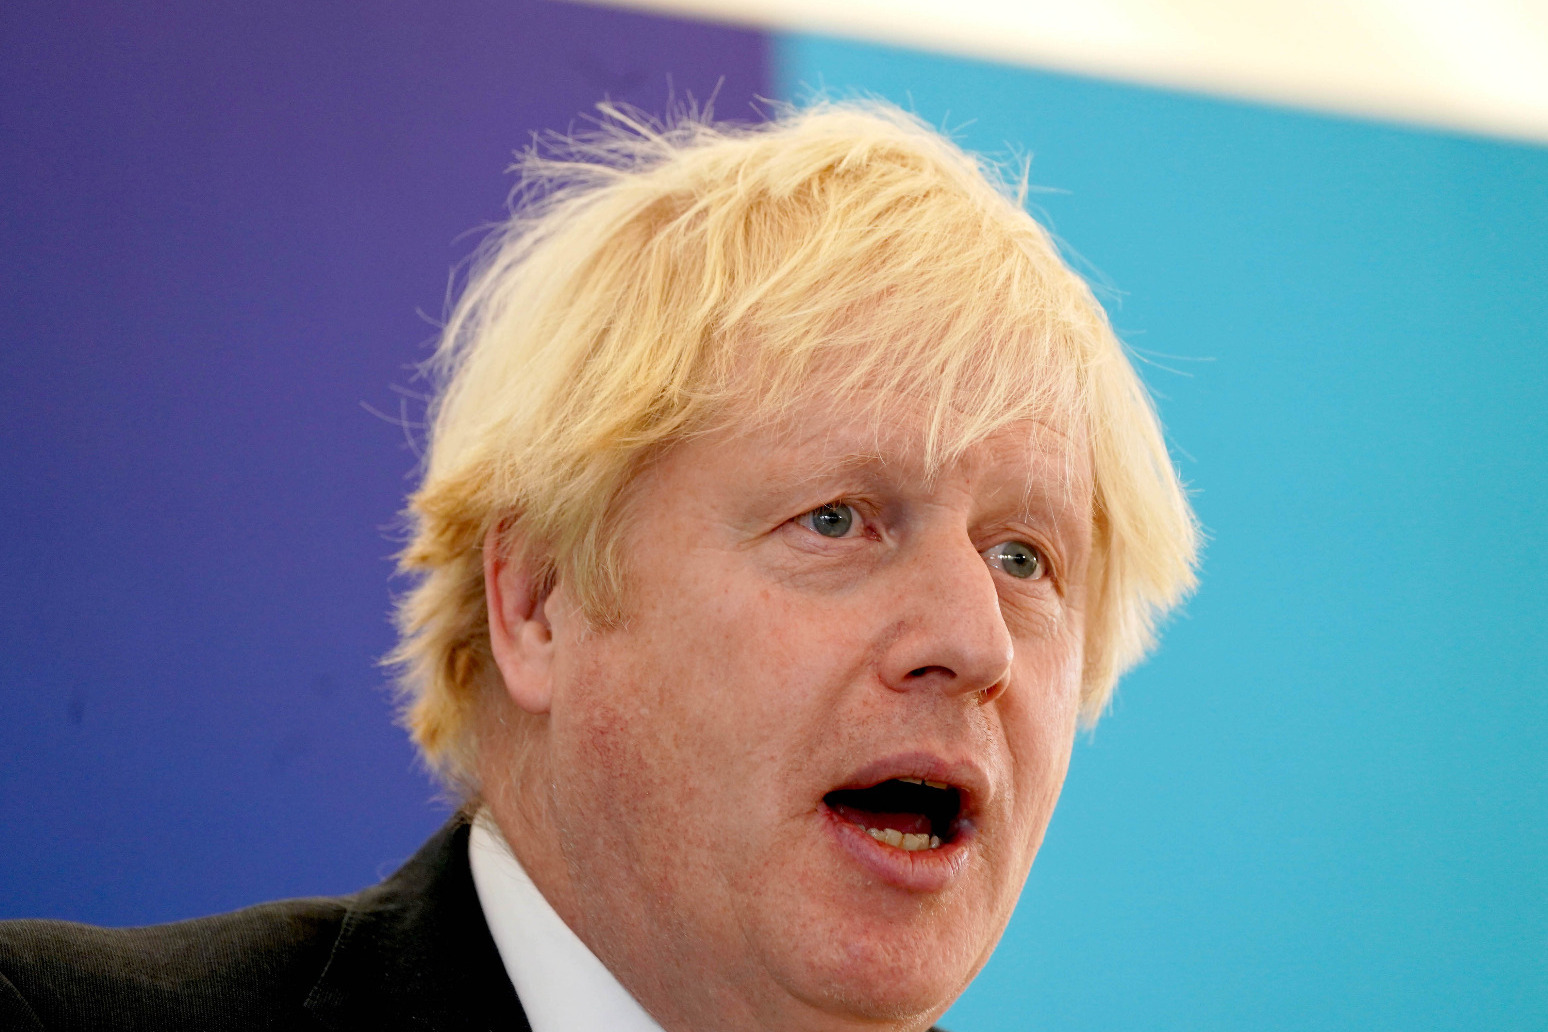 Johnson apologises for offence caused by aides joking about Christmas party 